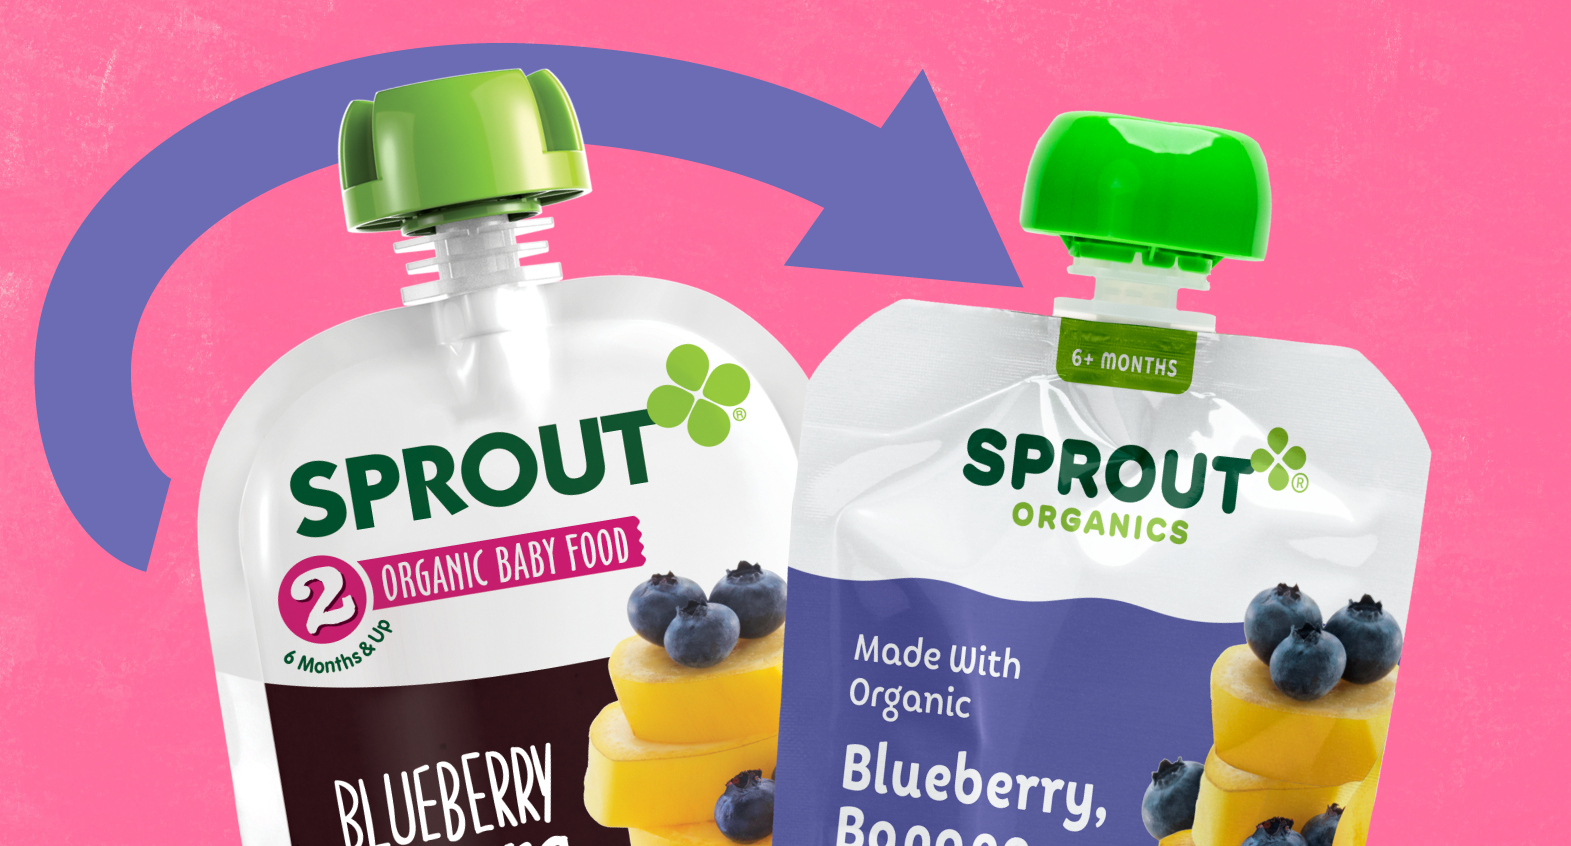 the old sprout organics pouch design and the new pouch design